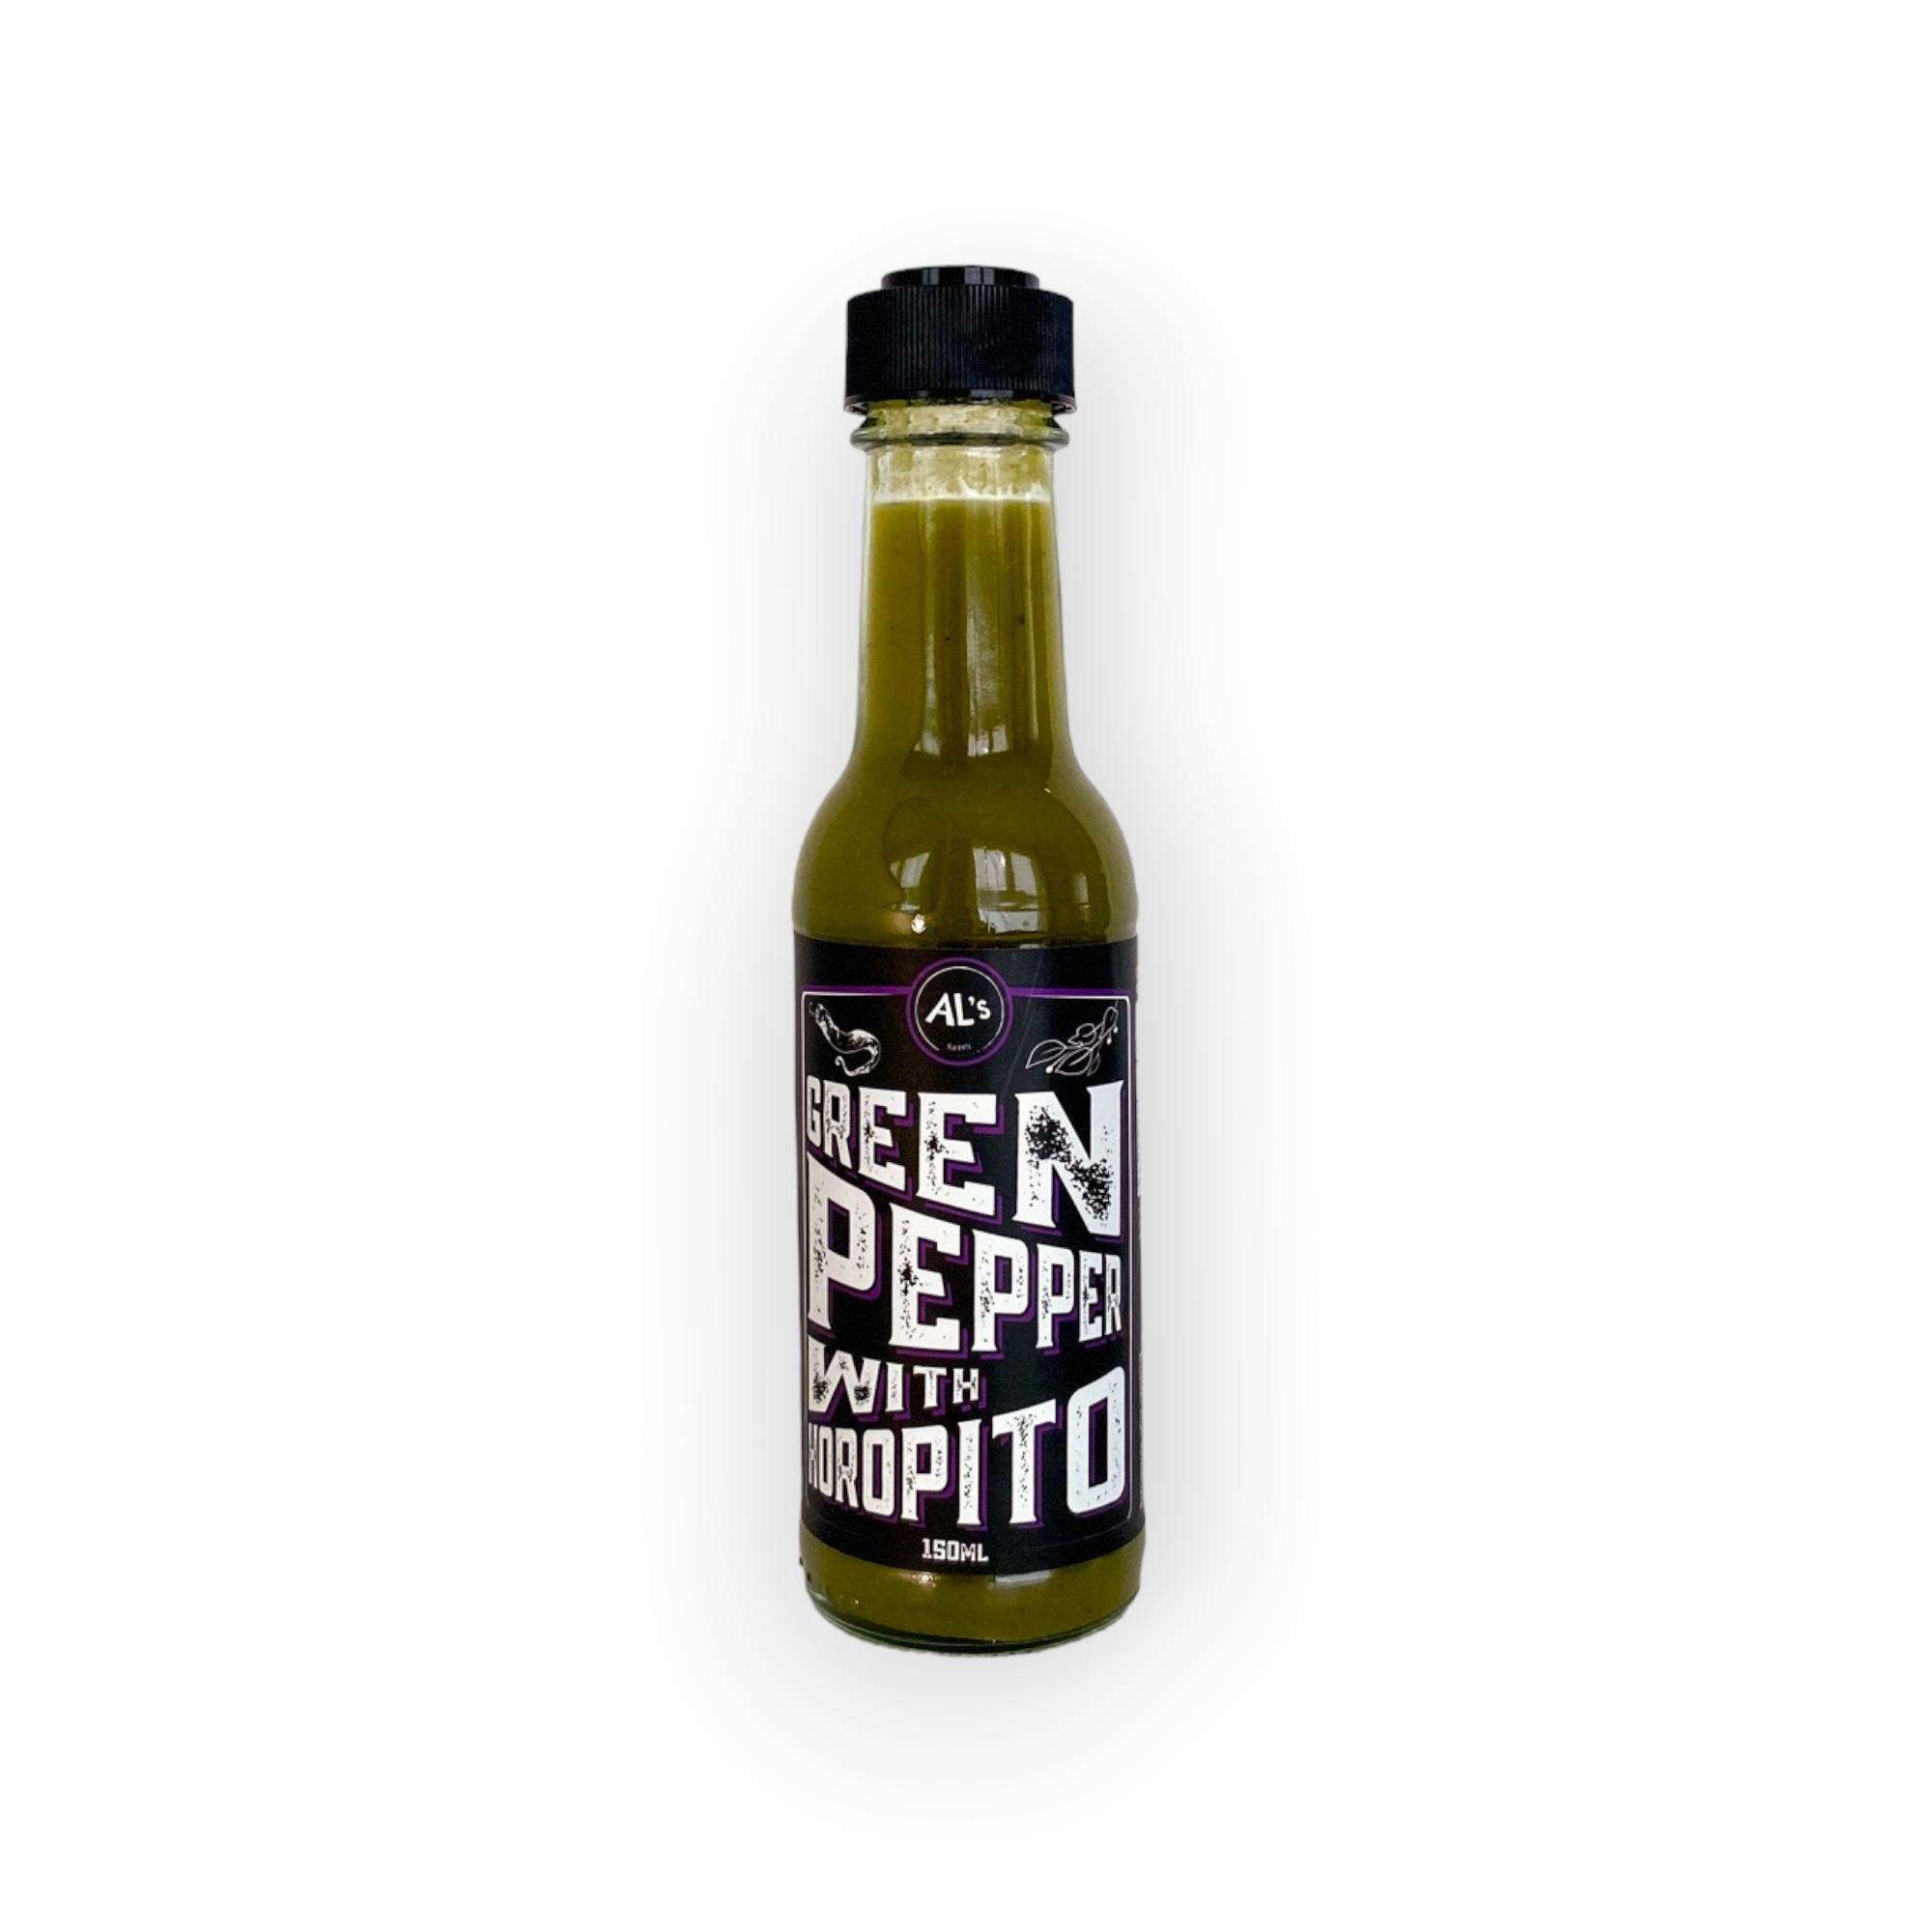 product image for Al's Green Pepper Sauce with Horopito